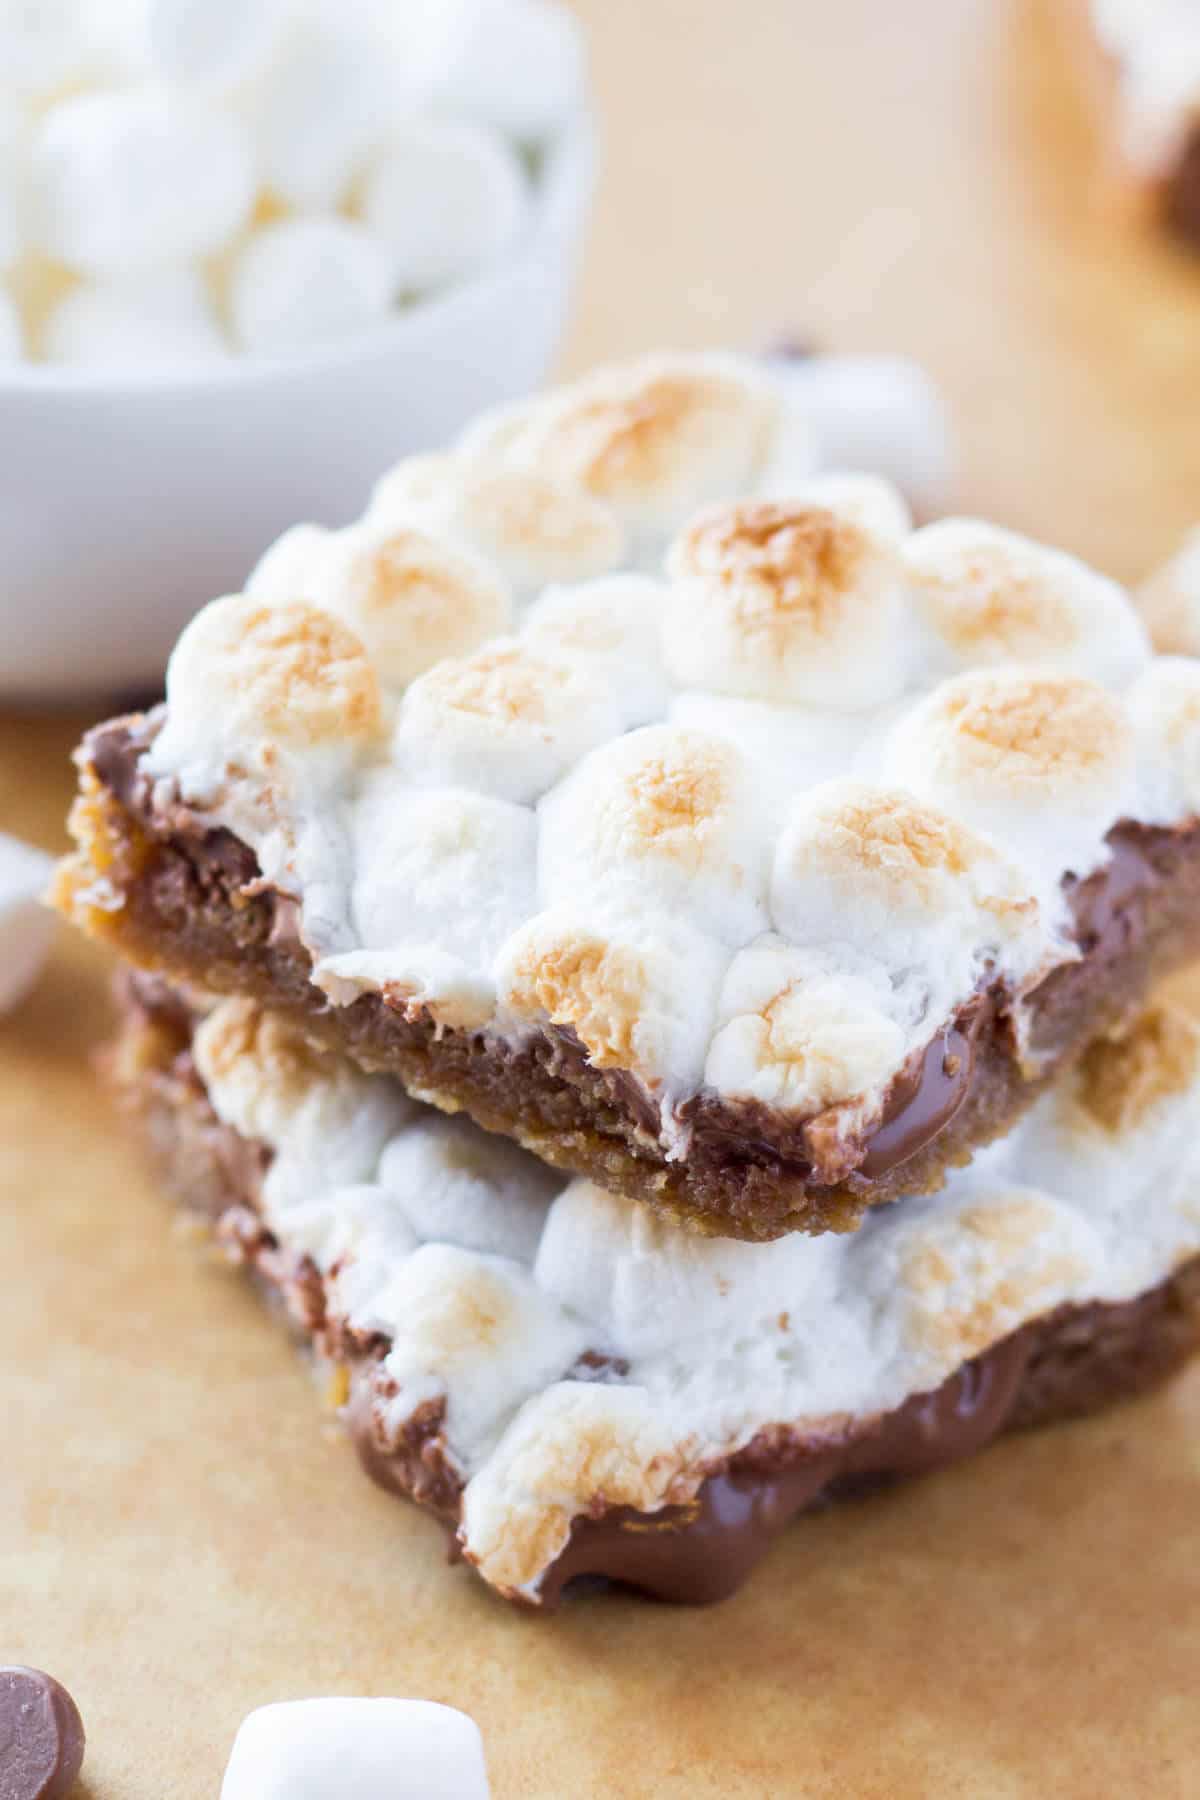 Chewy, gooey, Super Easy S'mores Bars - a blondie-like base, melted milk chocolate & toasted marshmallows come together in these amazing treats! Ready in no time and no mixer required!